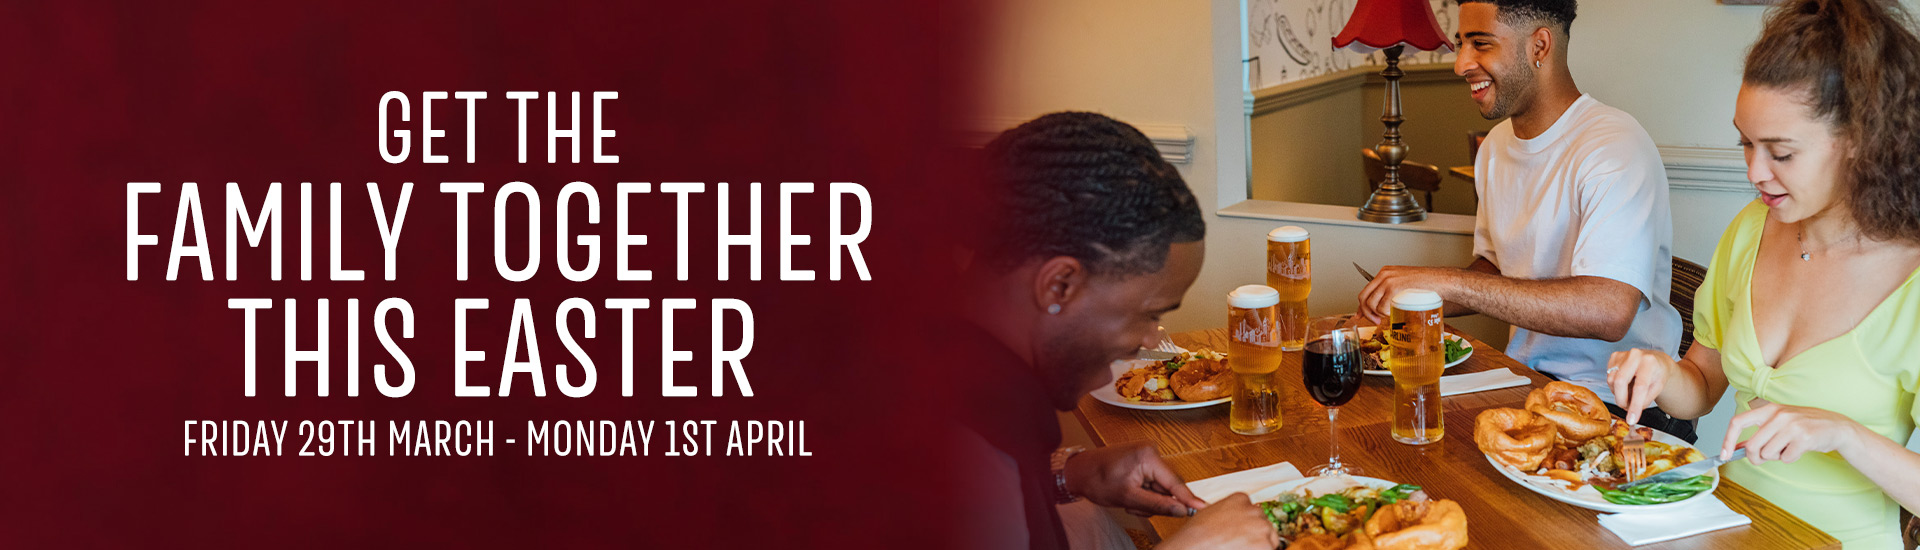 Easter Roast Dinner at Toby Carvery